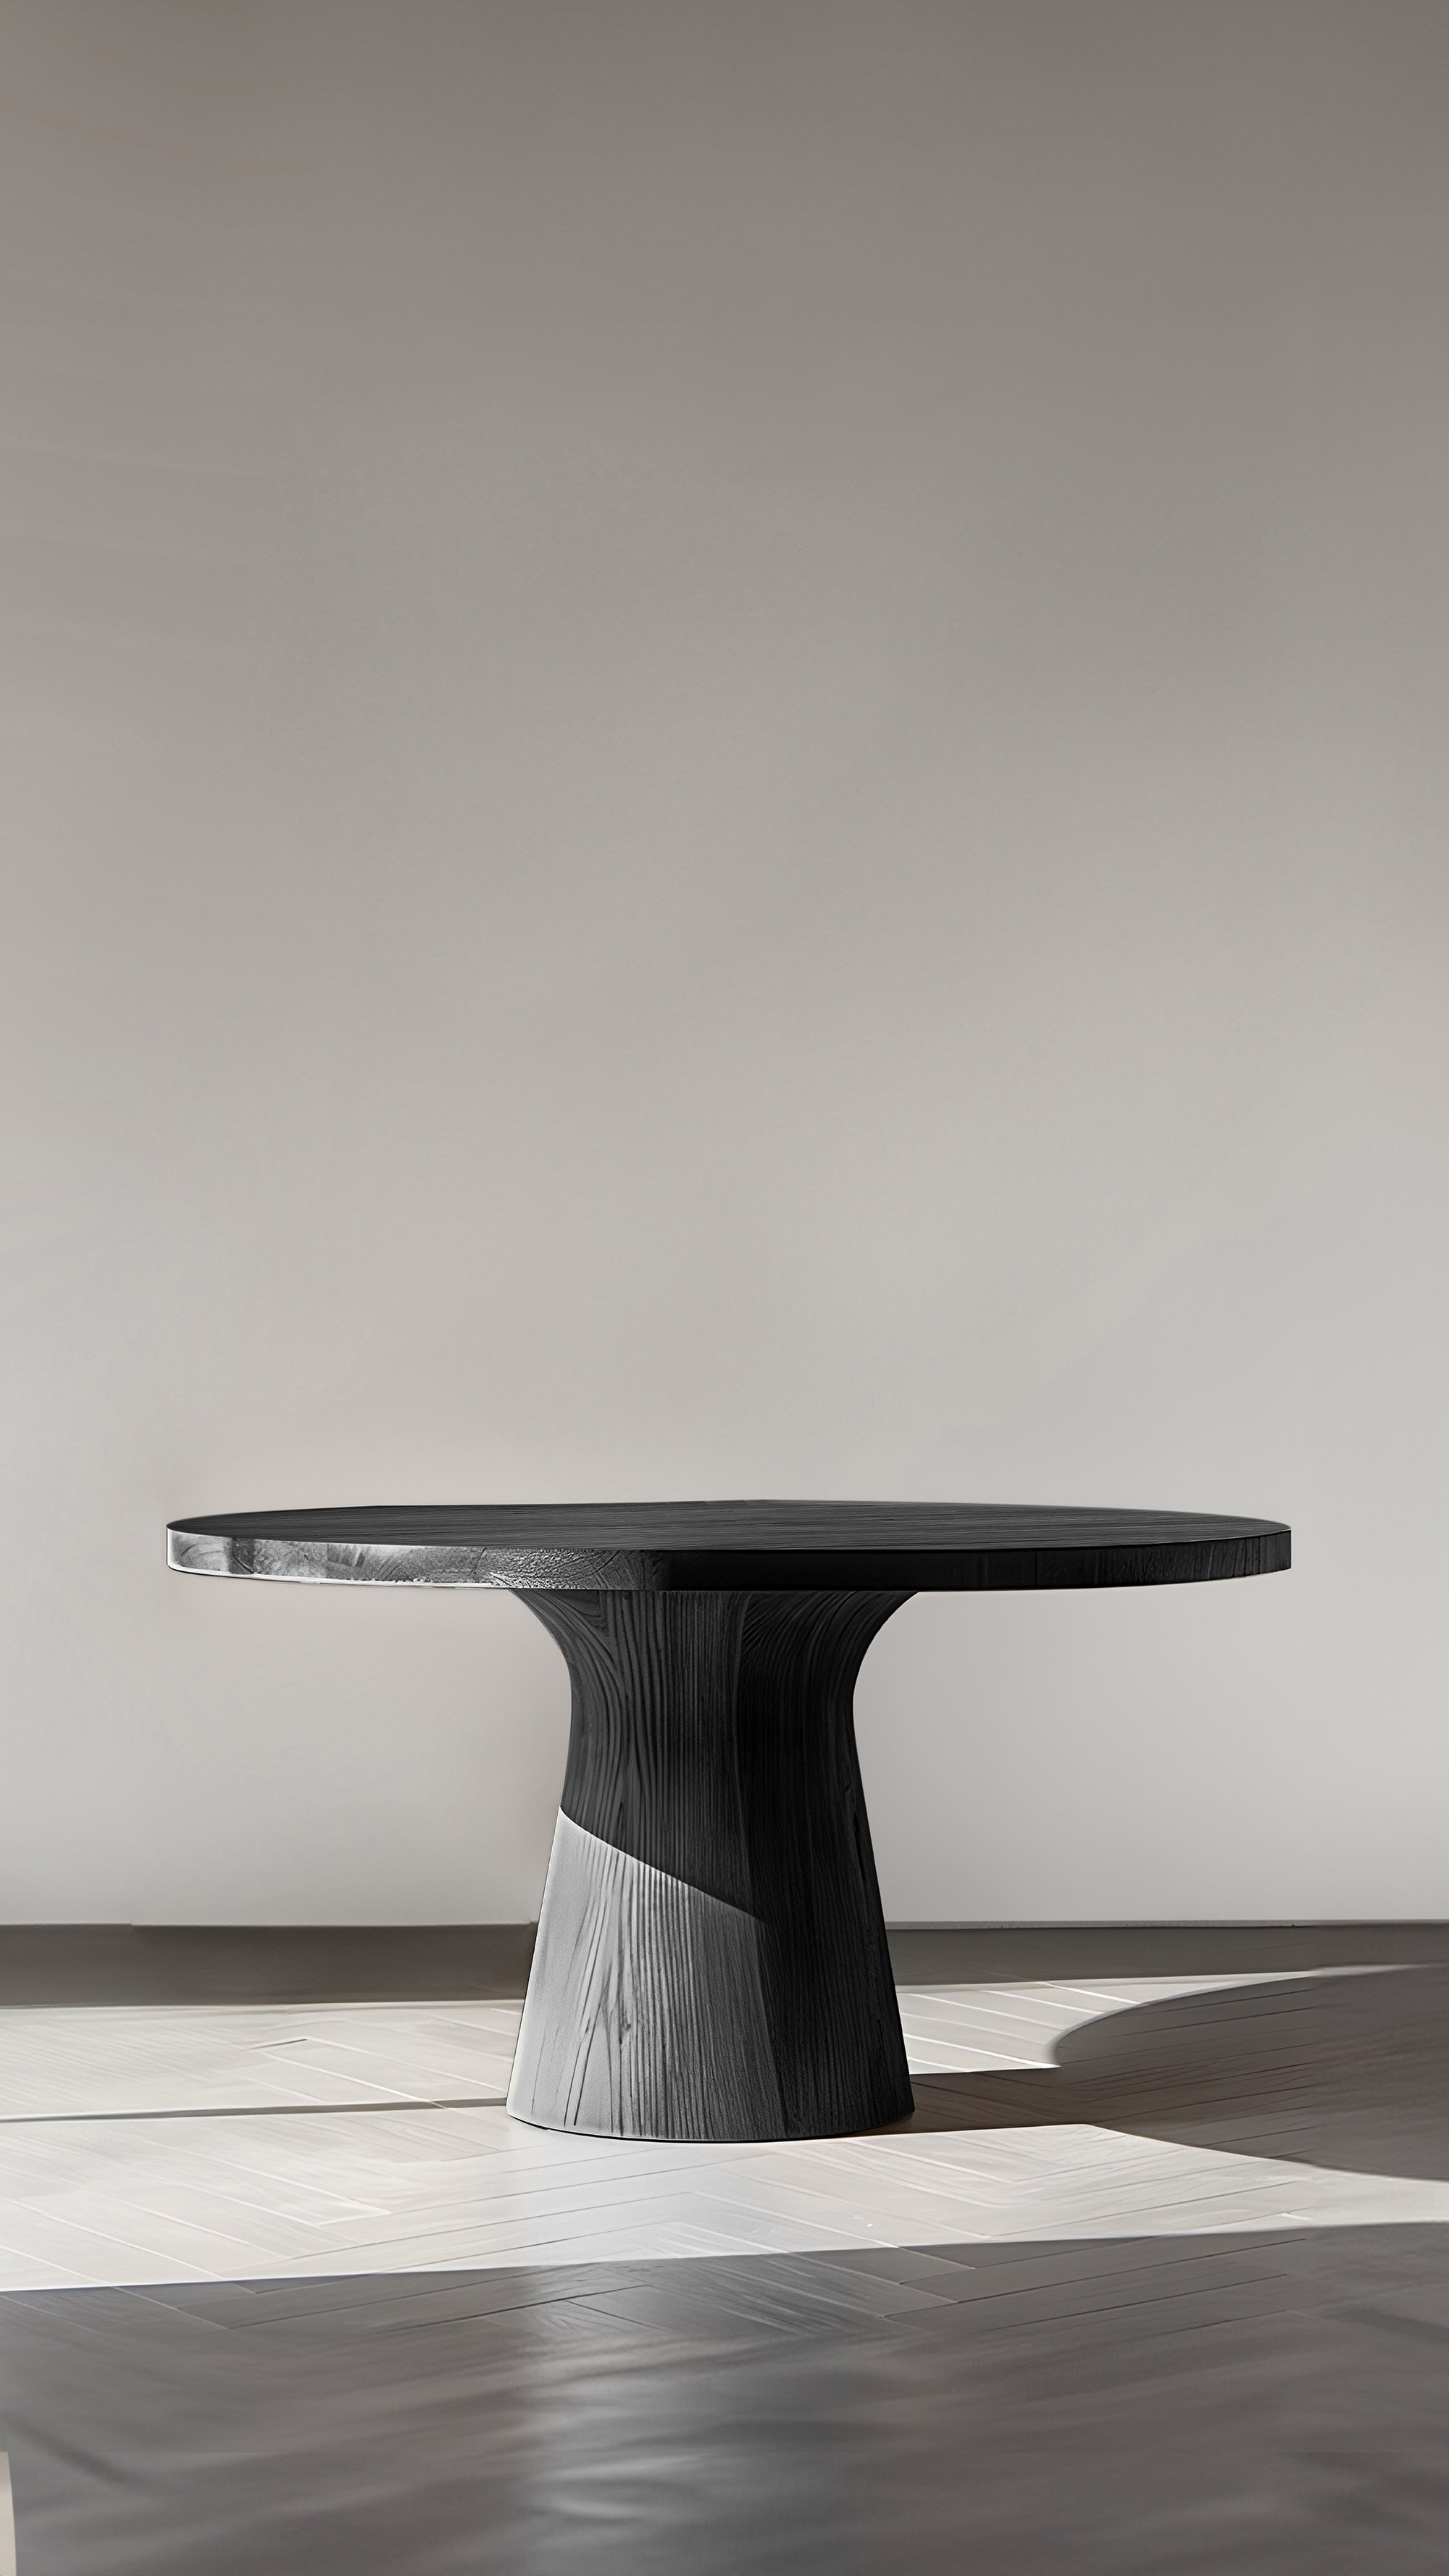 NONO's Socle Series No03, Cocktail Tables with a Black Wooden Twist - 6.jpg